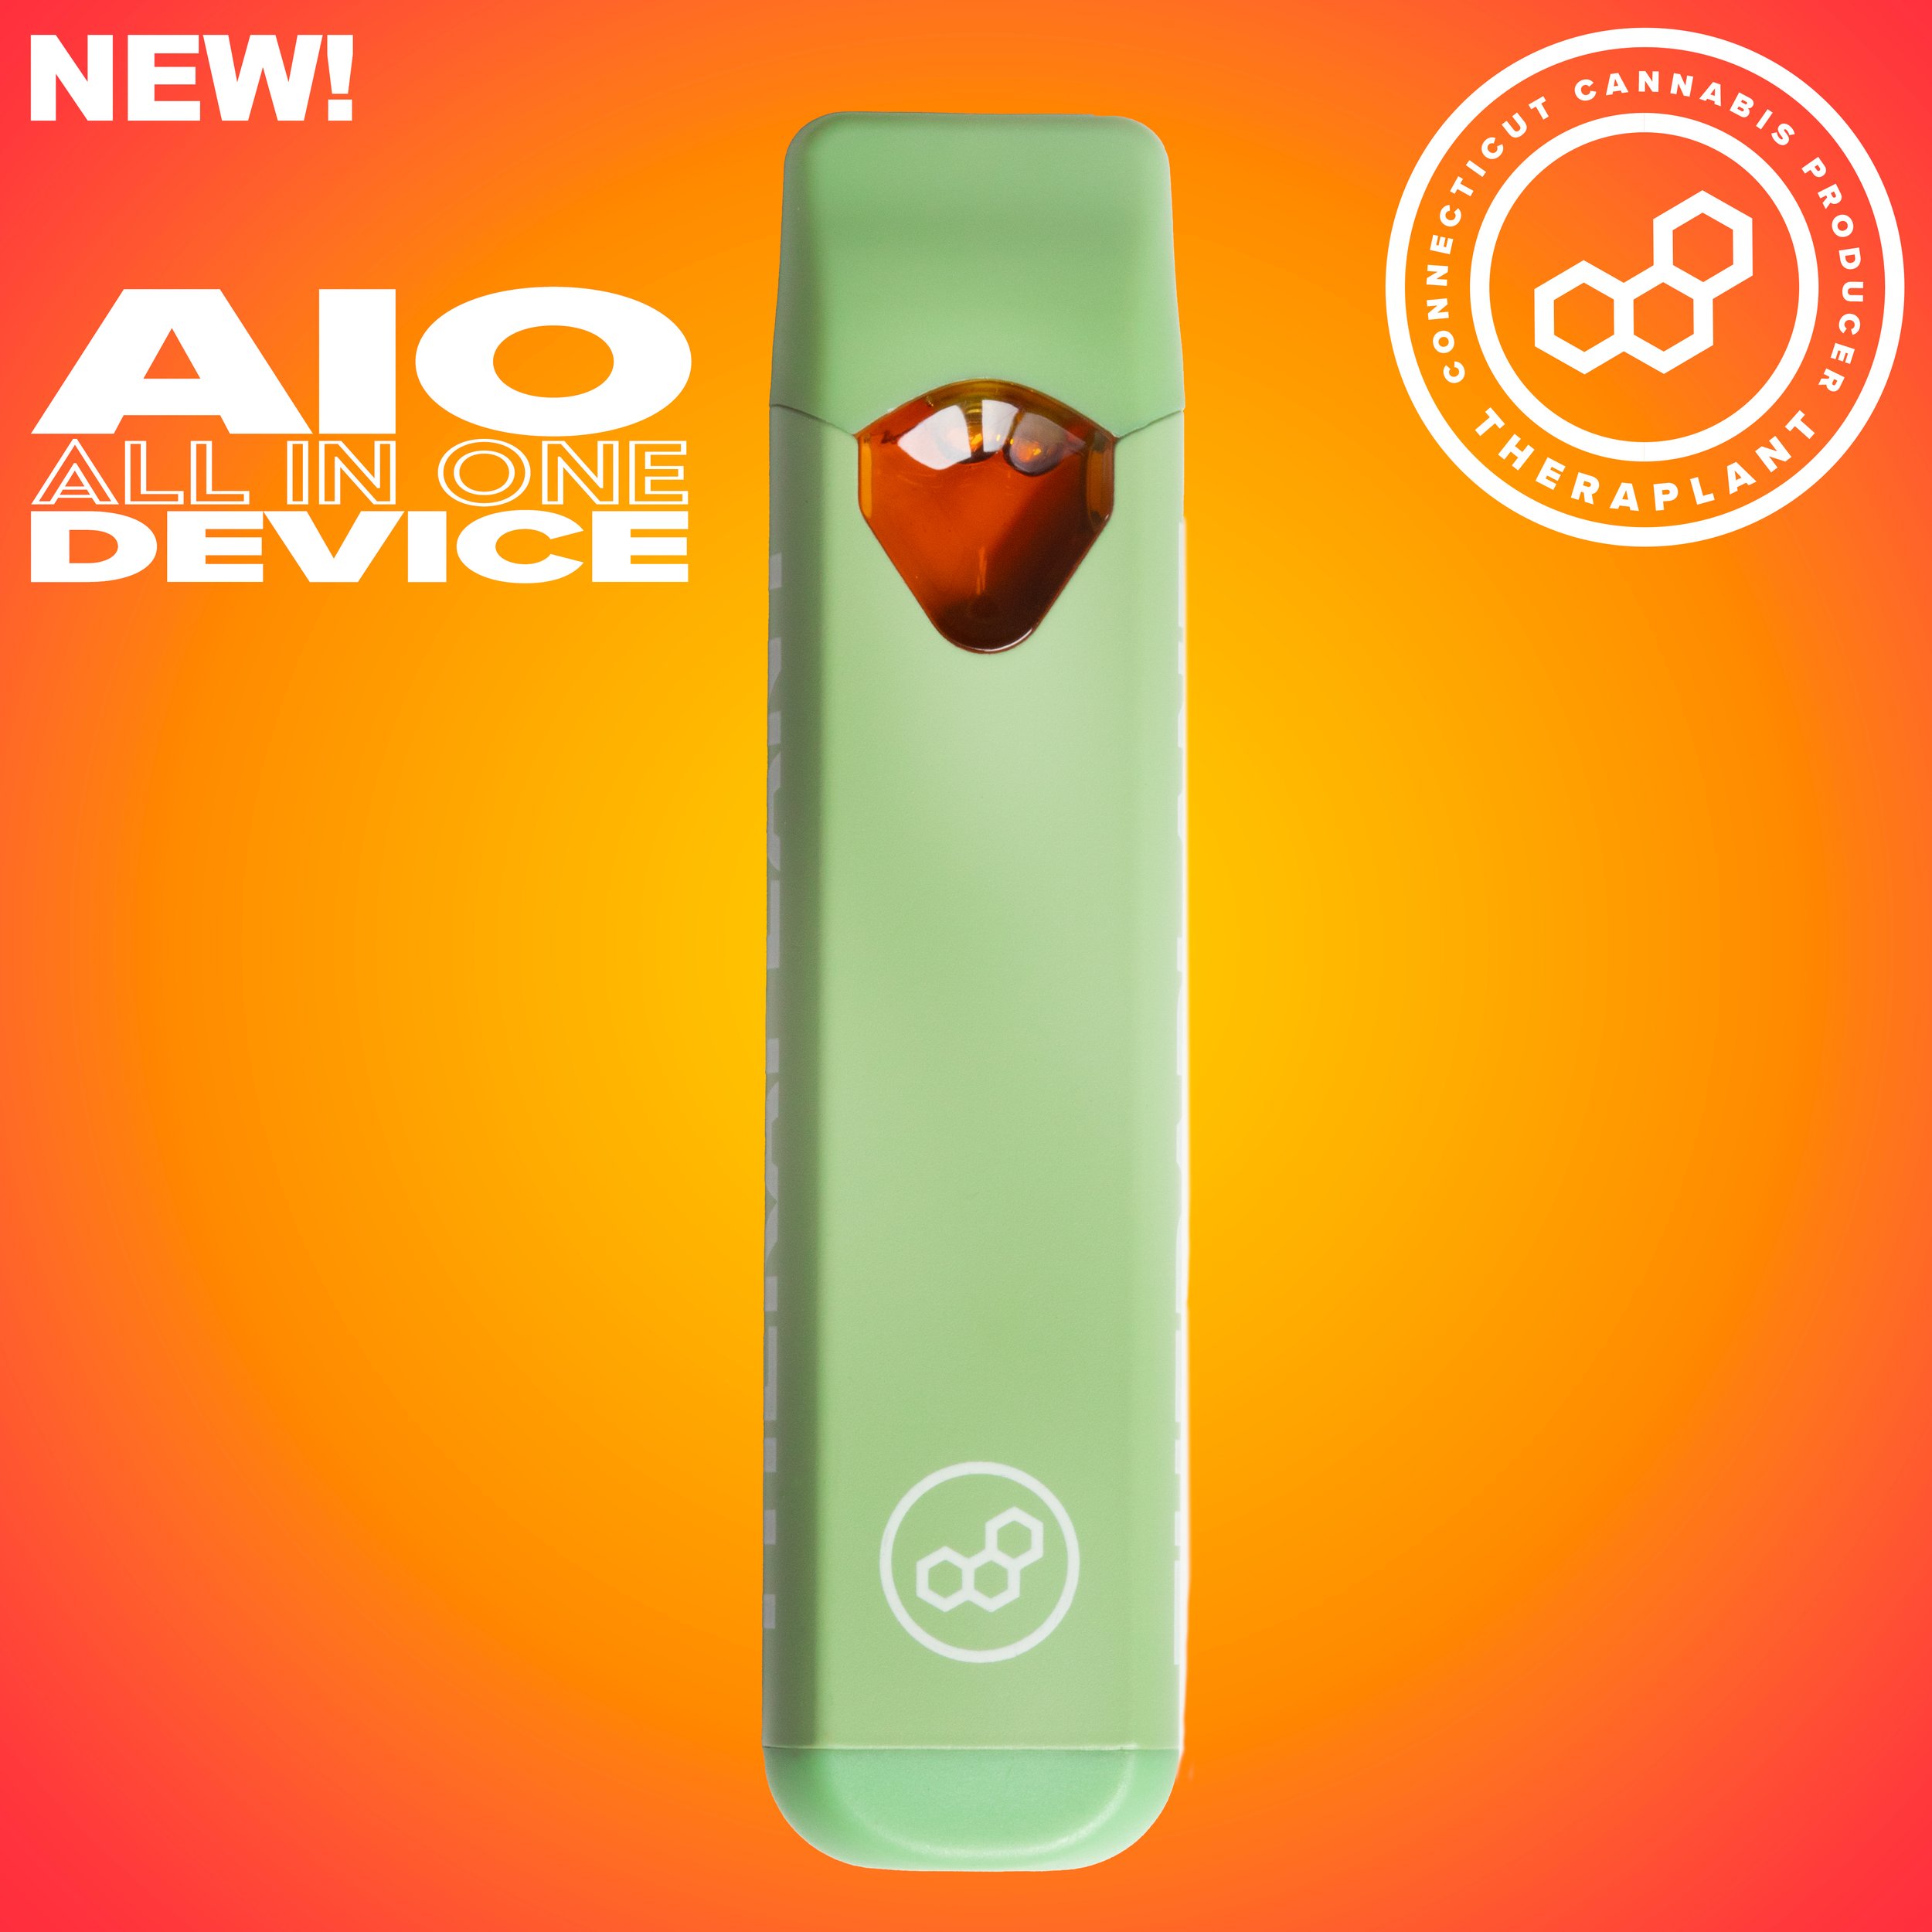 NEW AIO (All In One) Device — THERAPLANT